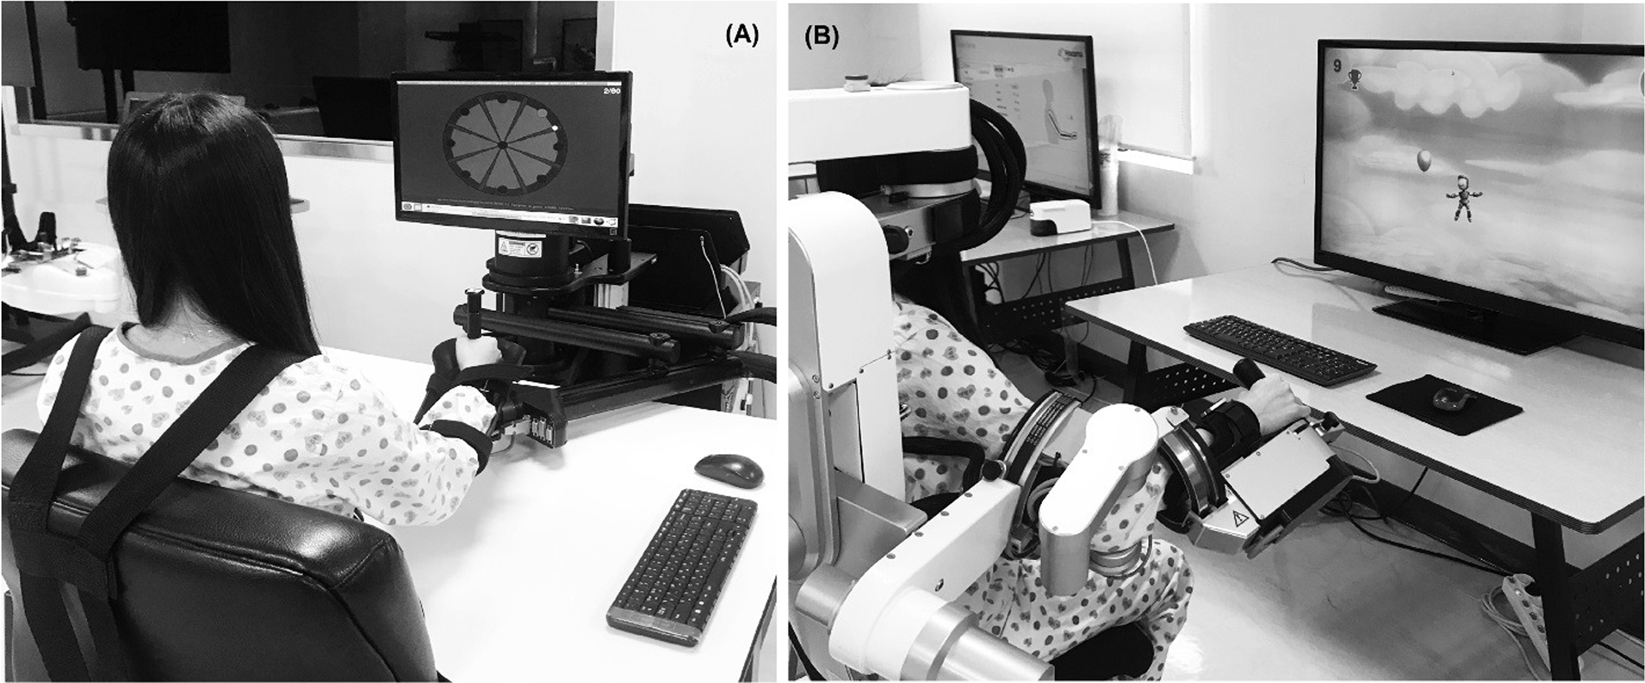 Comparisons between end-effector and exoskeleton rehabilitation robots  regarding upper extremity function among chronic stroke patients with  moderate-to-severe upper limb impairment | Scientific Reports